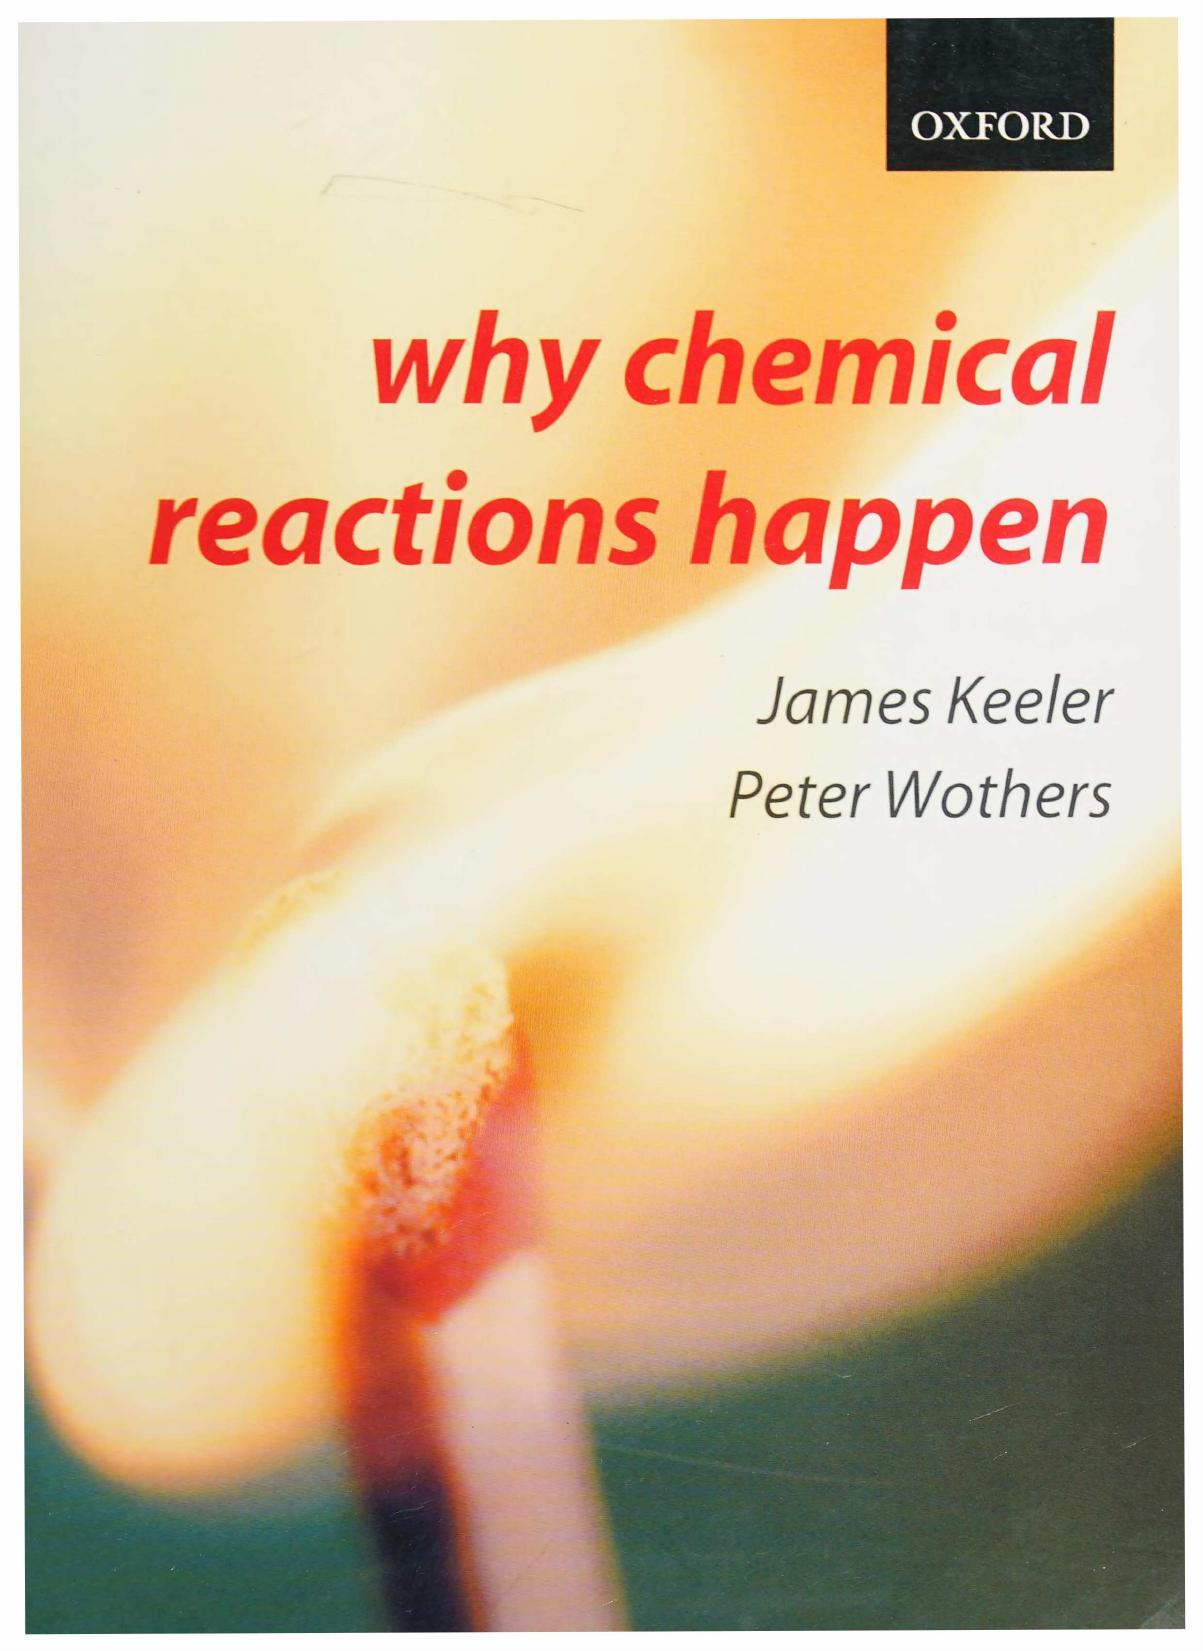 Why Chemical Reactions Happen by James Keeler Peter Wothers